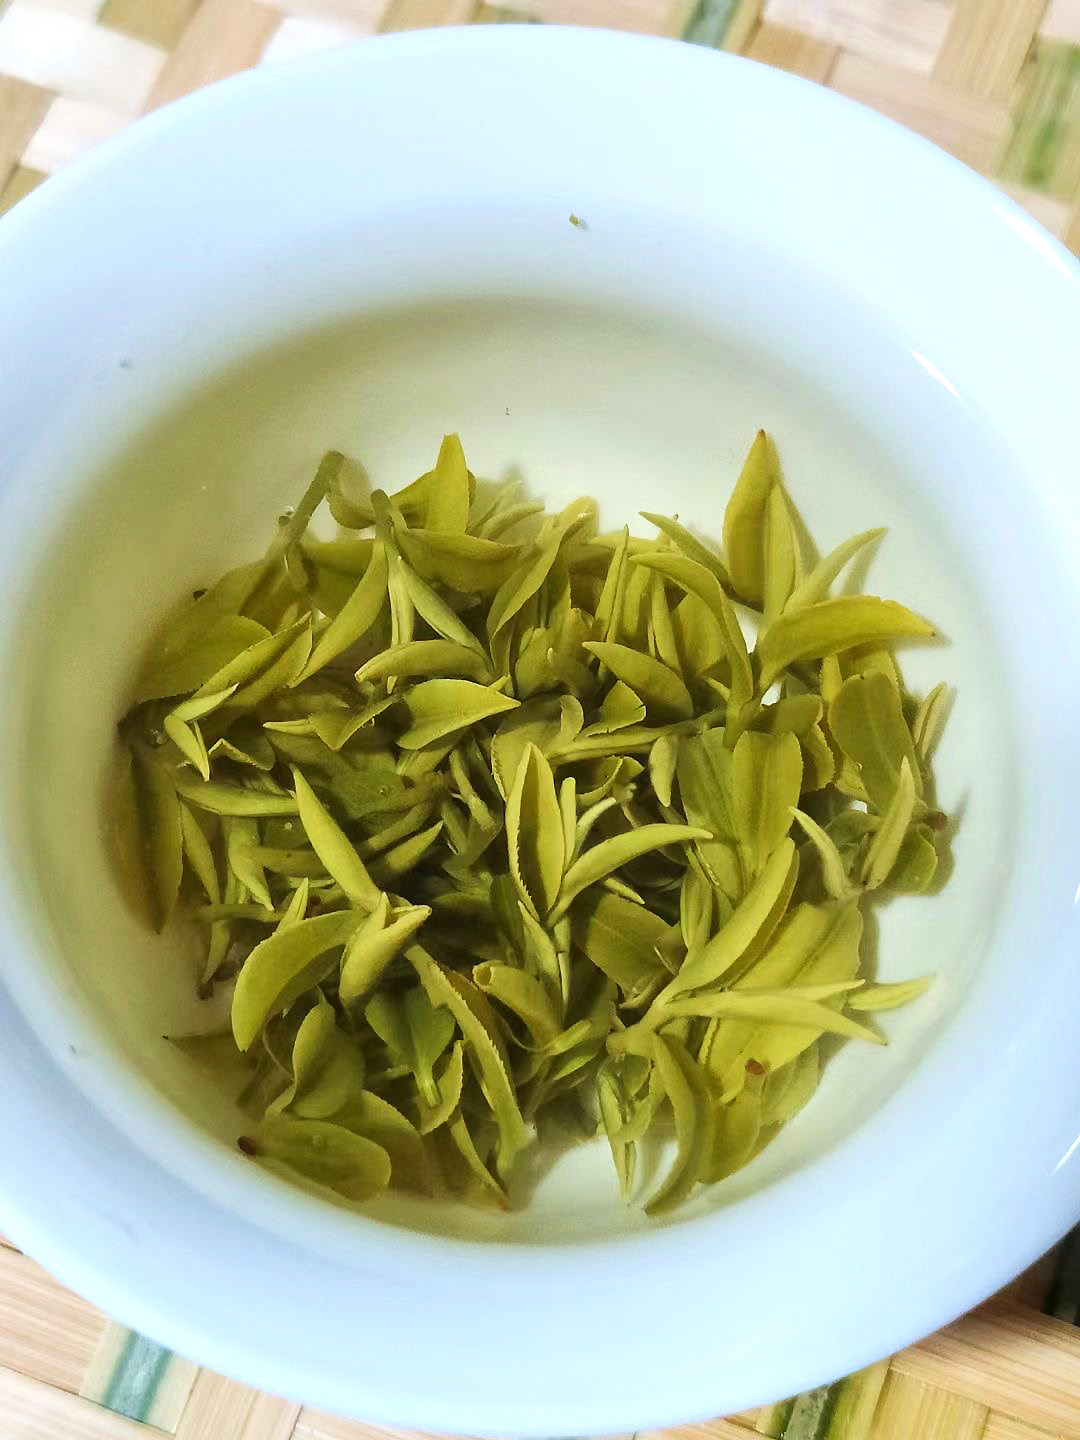 Looking down into a gaiwan brewing very crisp, clean and even green tea leaves with a delicate pale infusion.